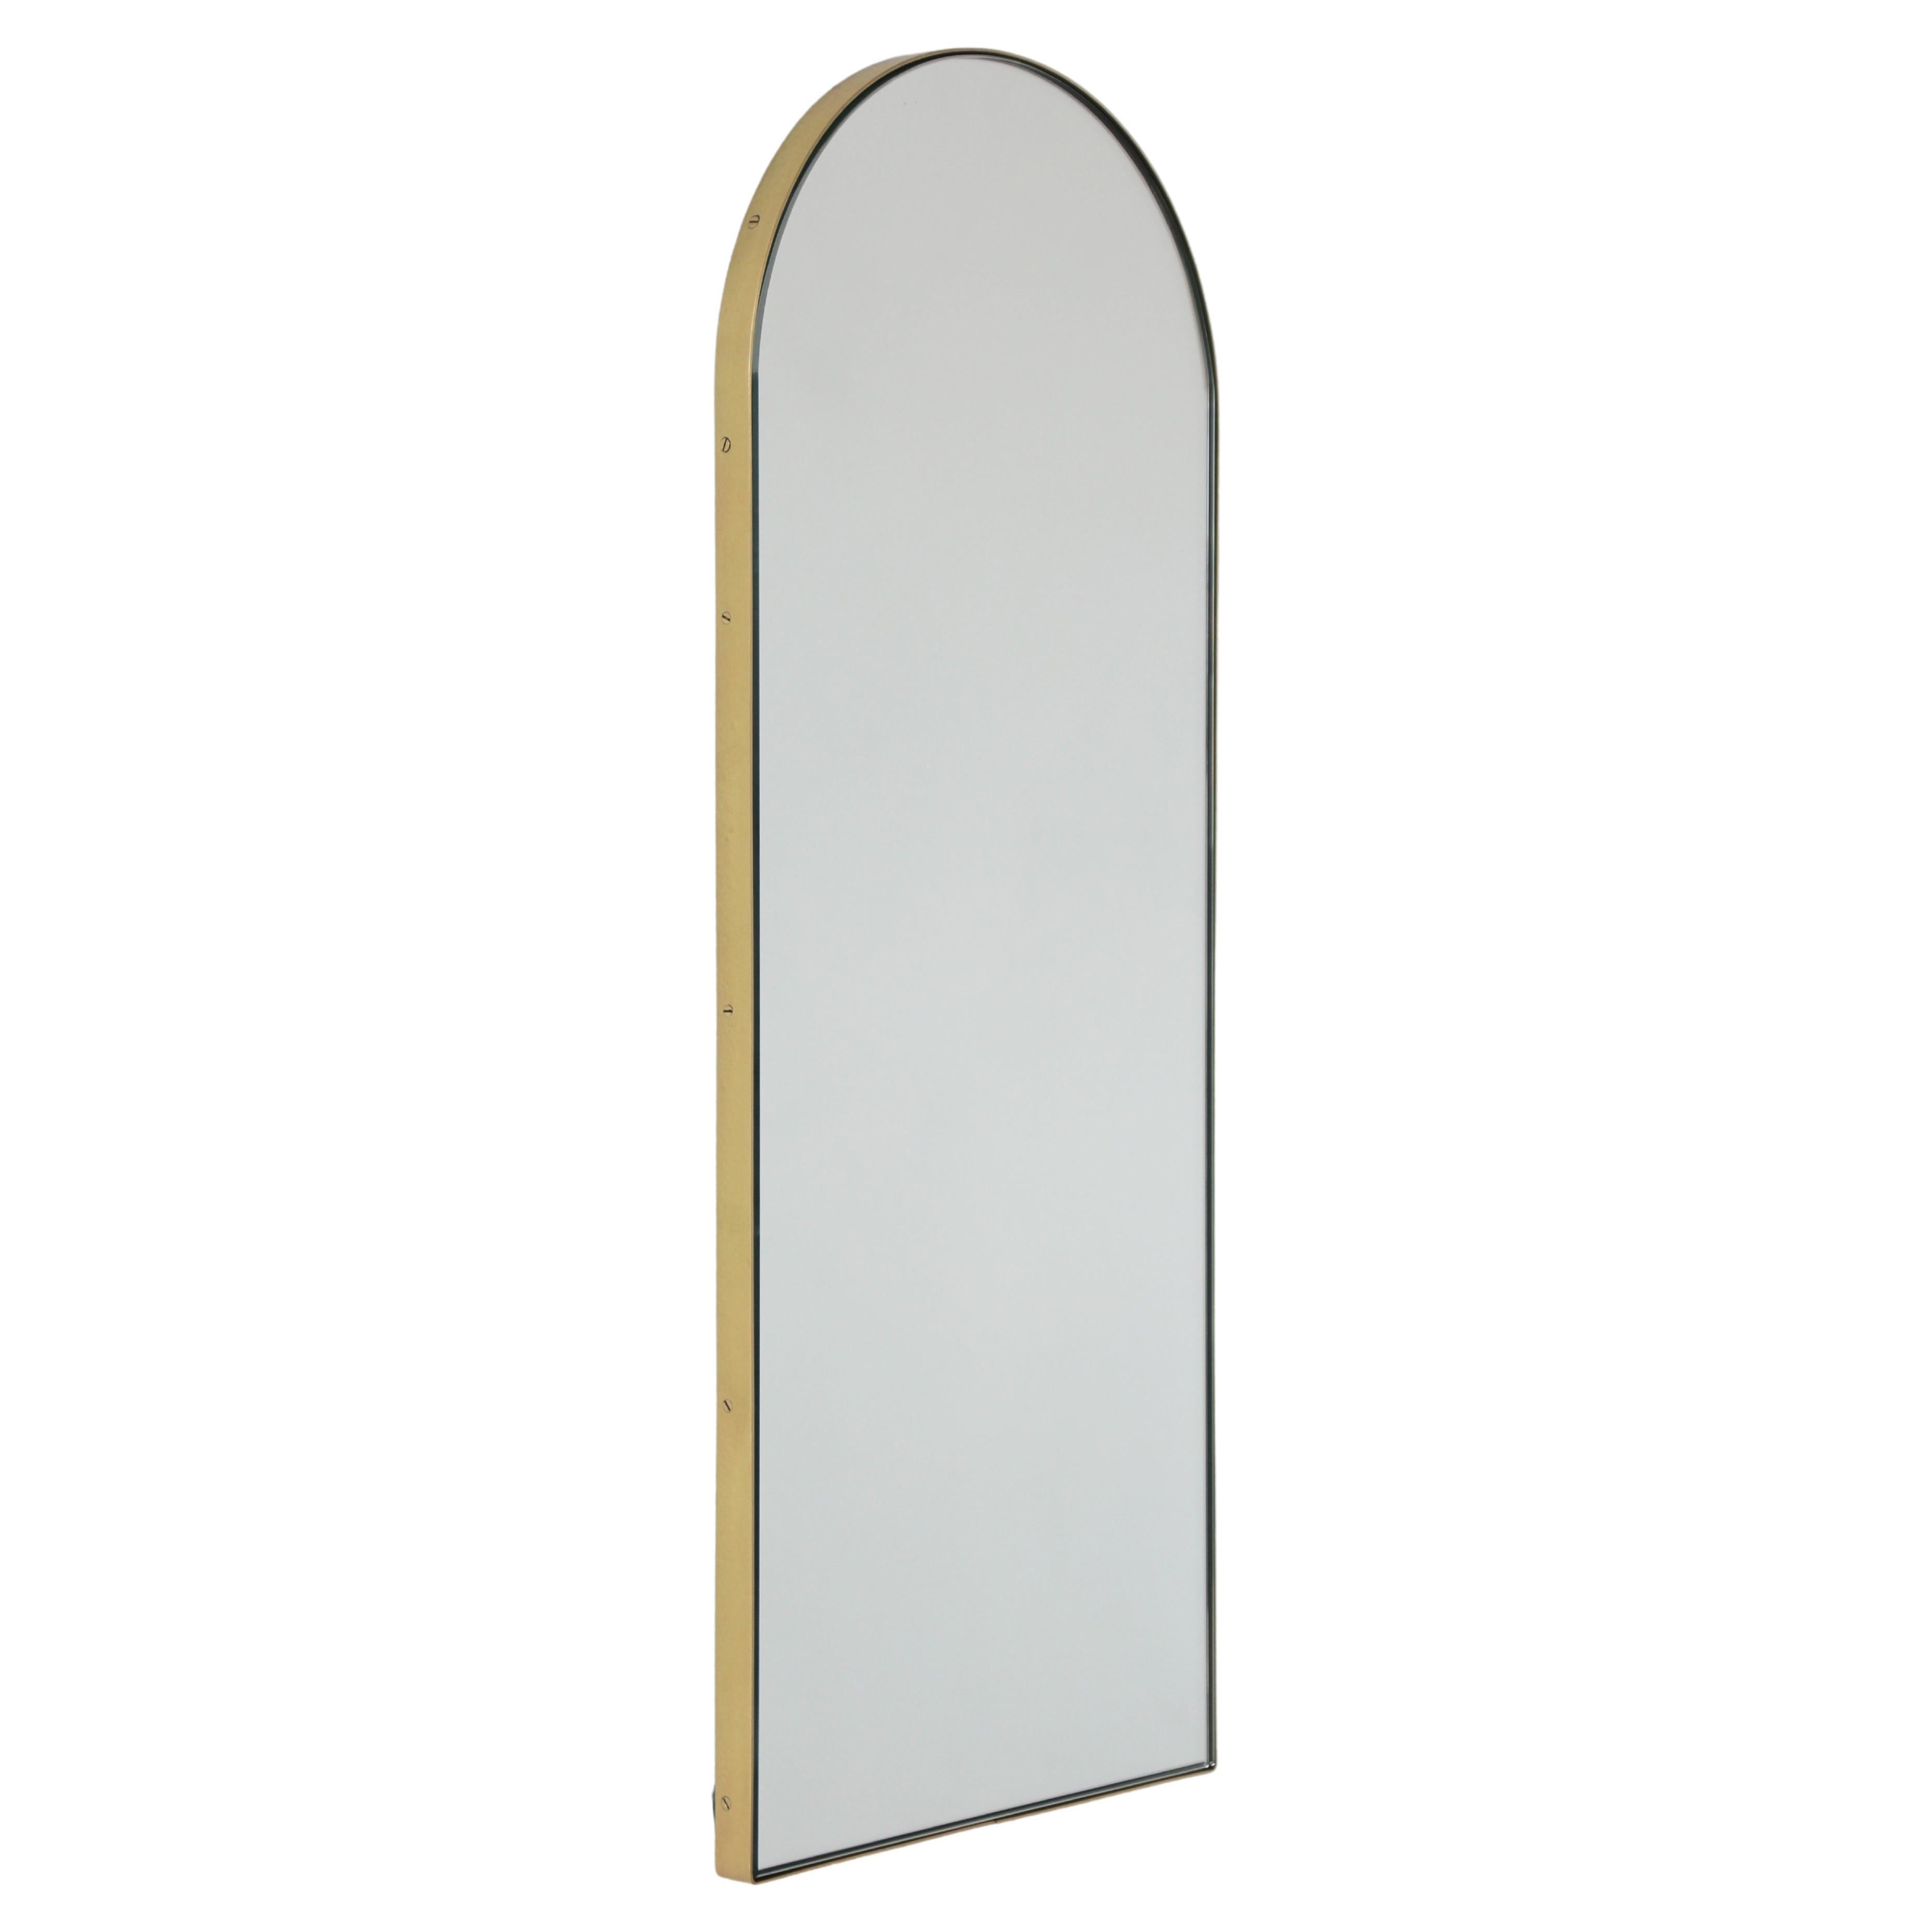 Arcus Arch shaped Art Deco Elegance Mirror with Brass Frame, Small